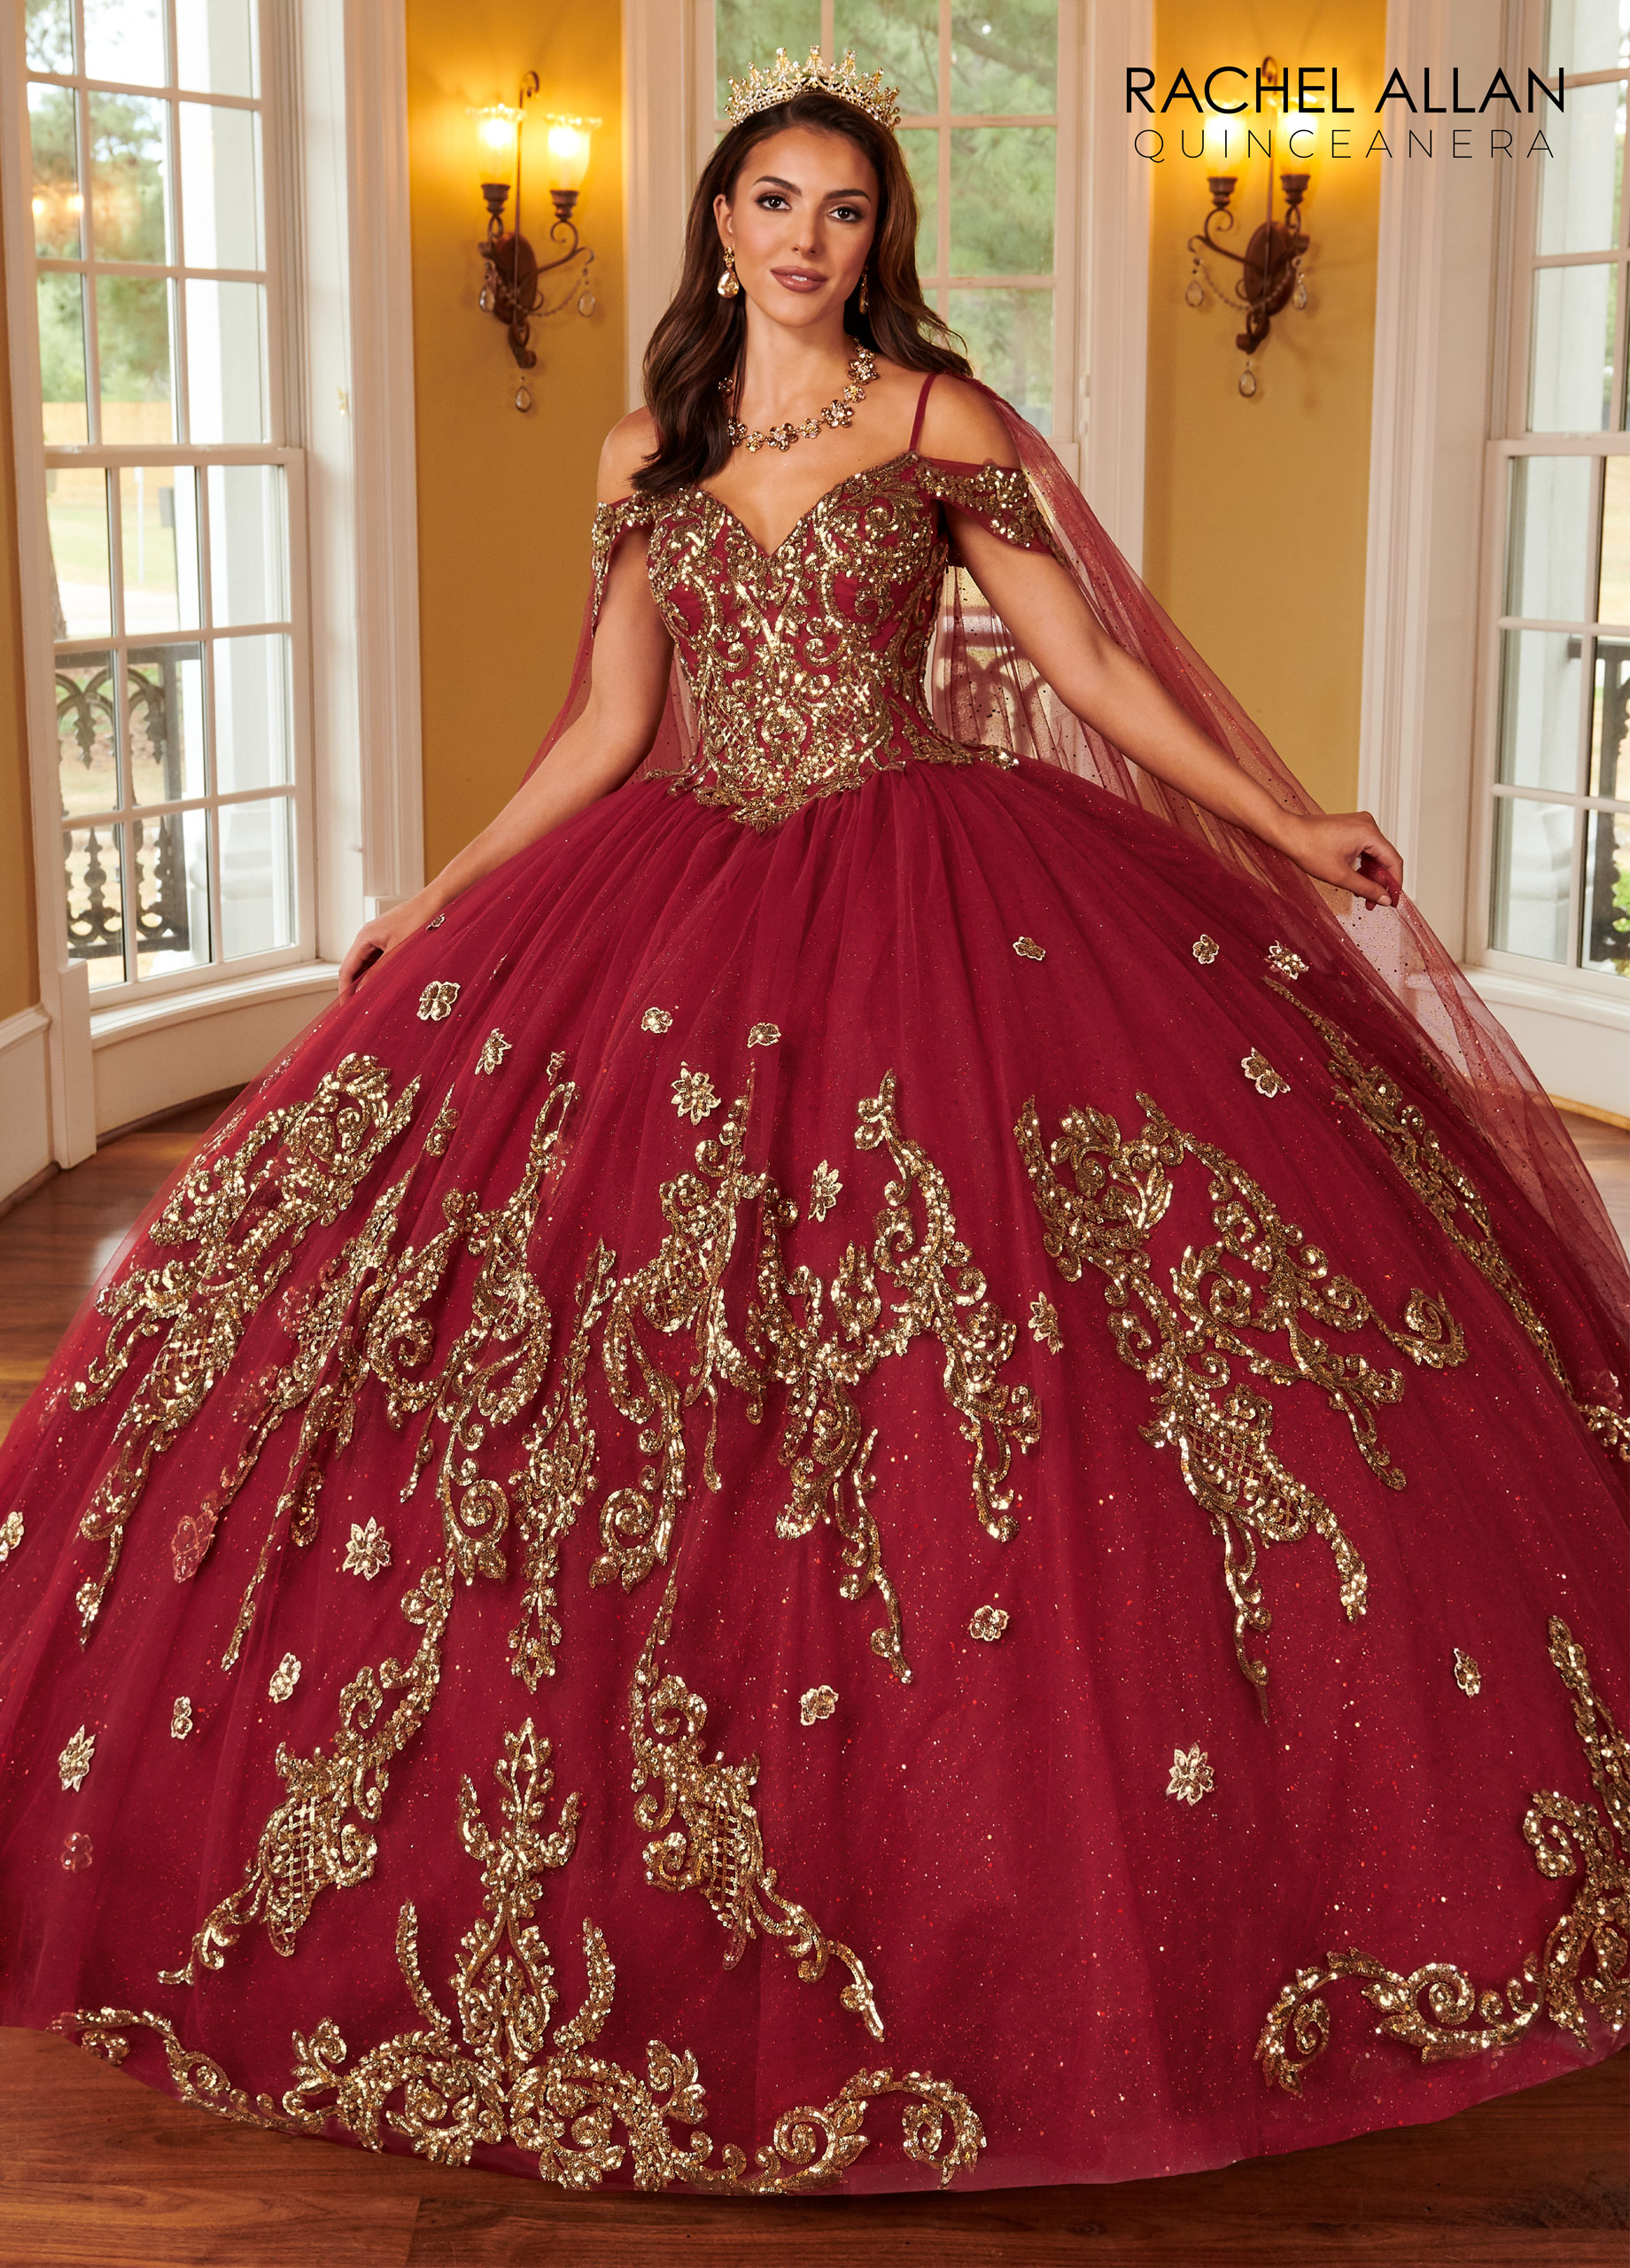 Sweetheart Ball Gowns La Reina in BURGUNDY GOLD Color